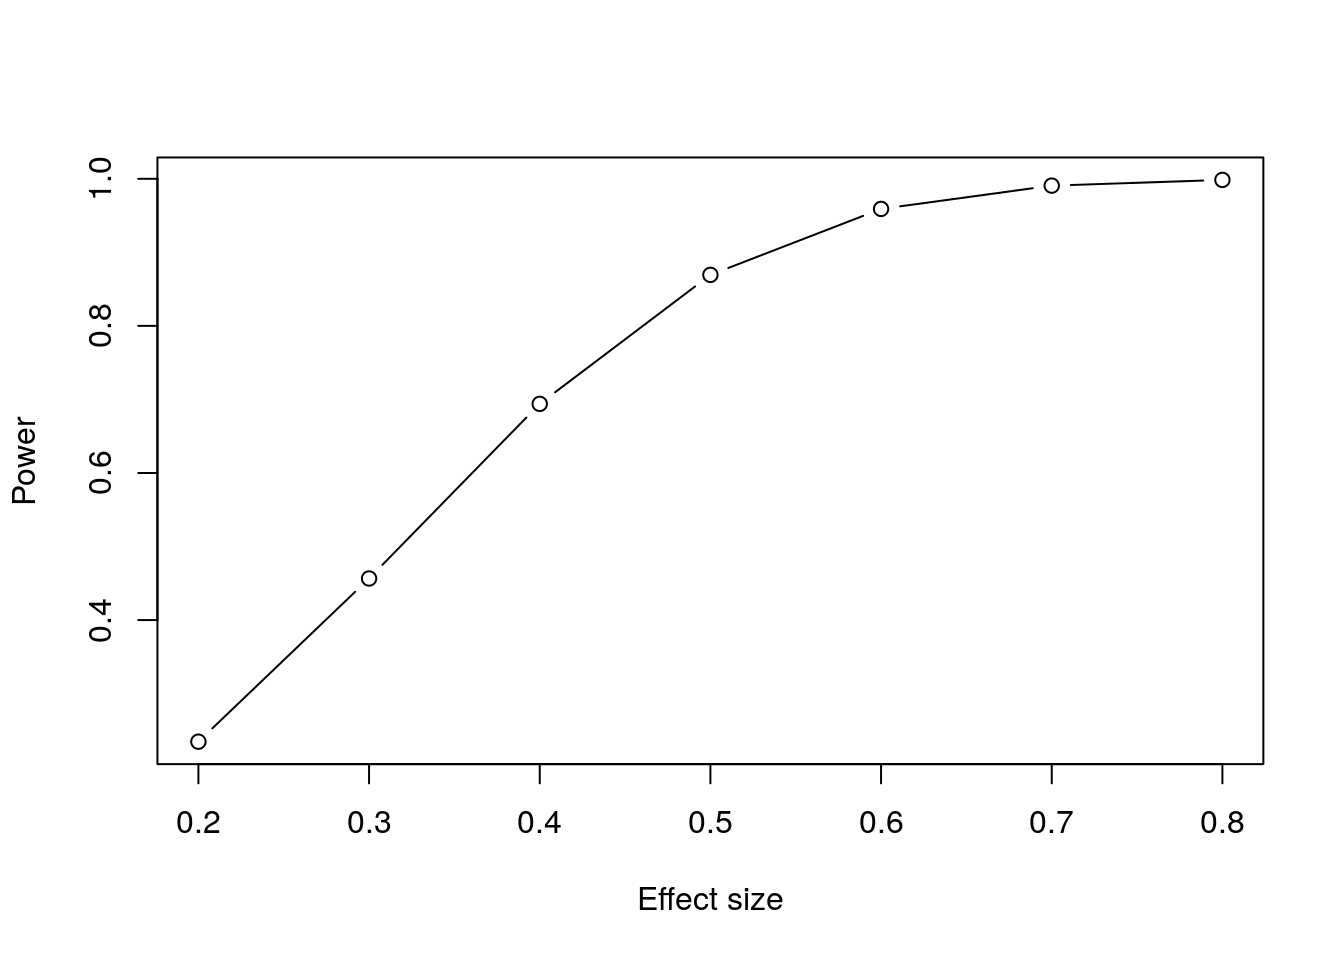 Plot of power against effect size for a paired t-test